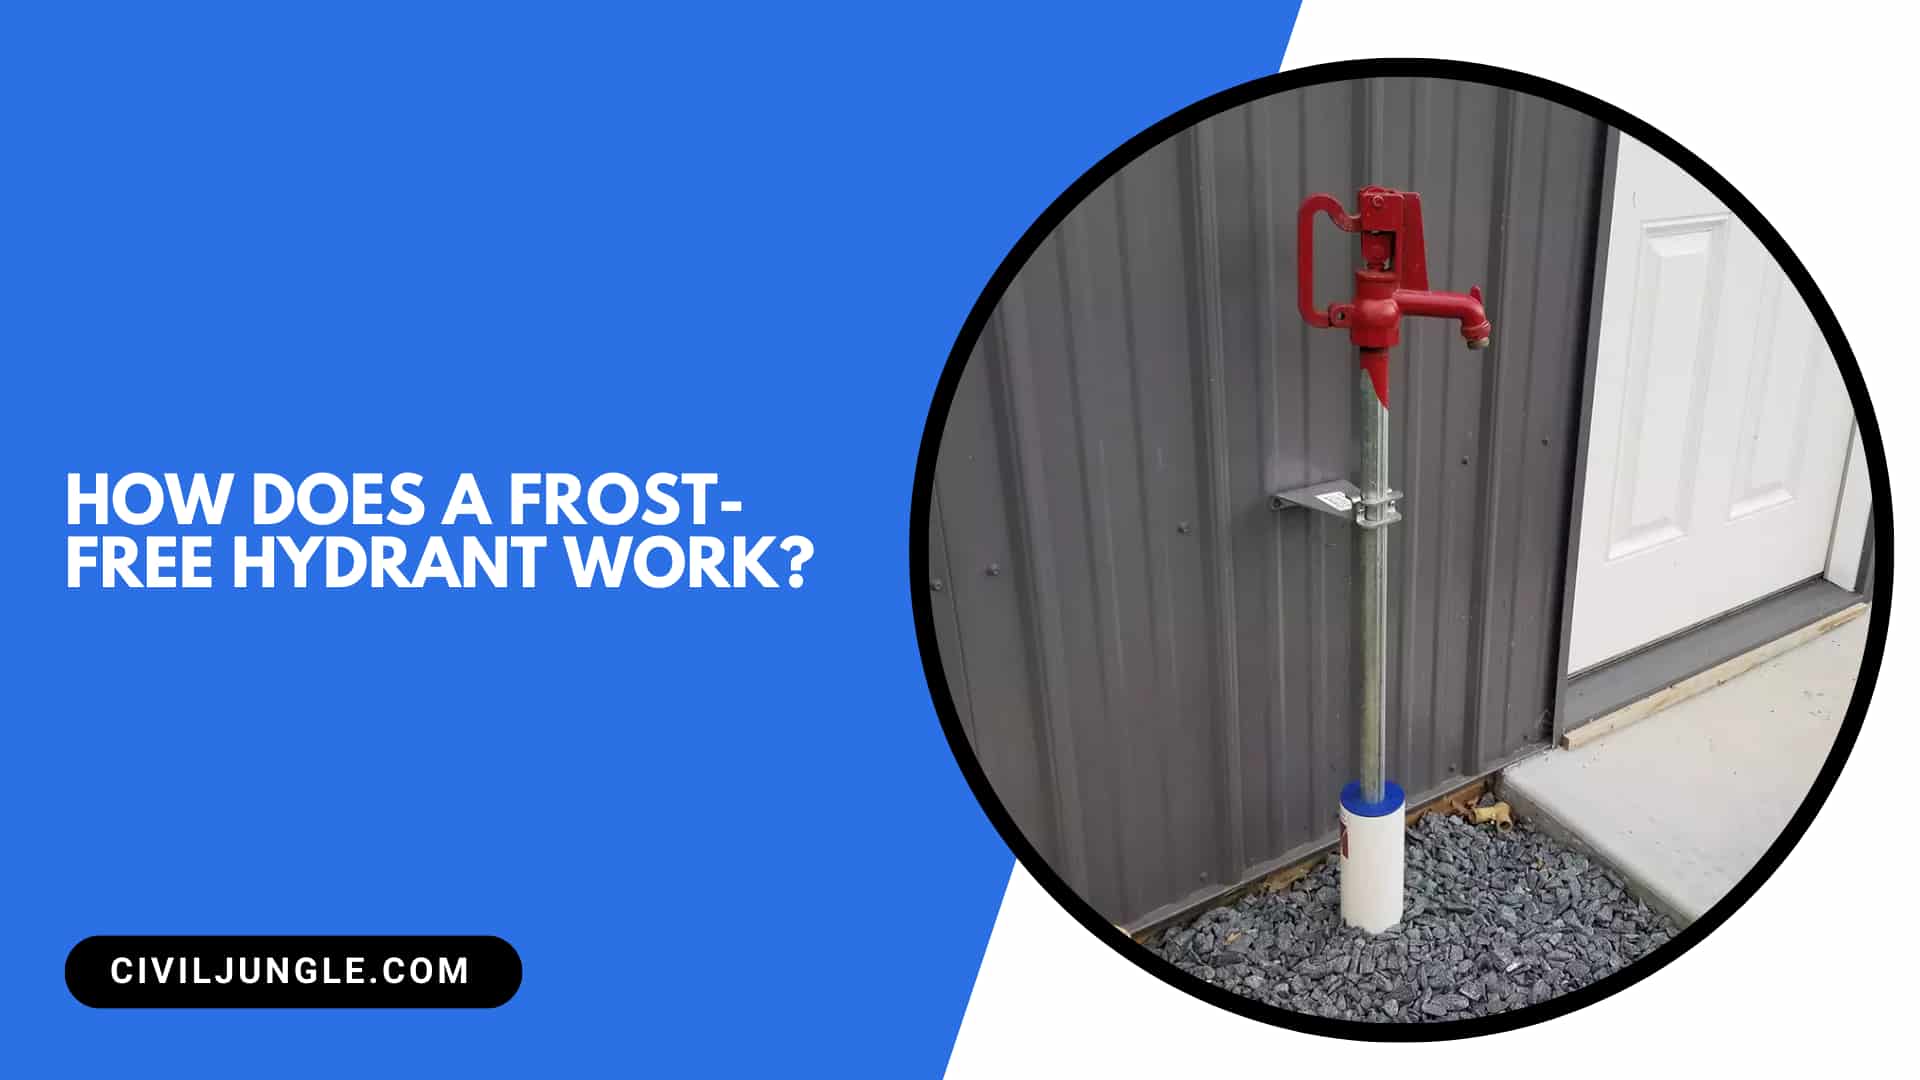 How Does a Frost-Free Hydrant Work?